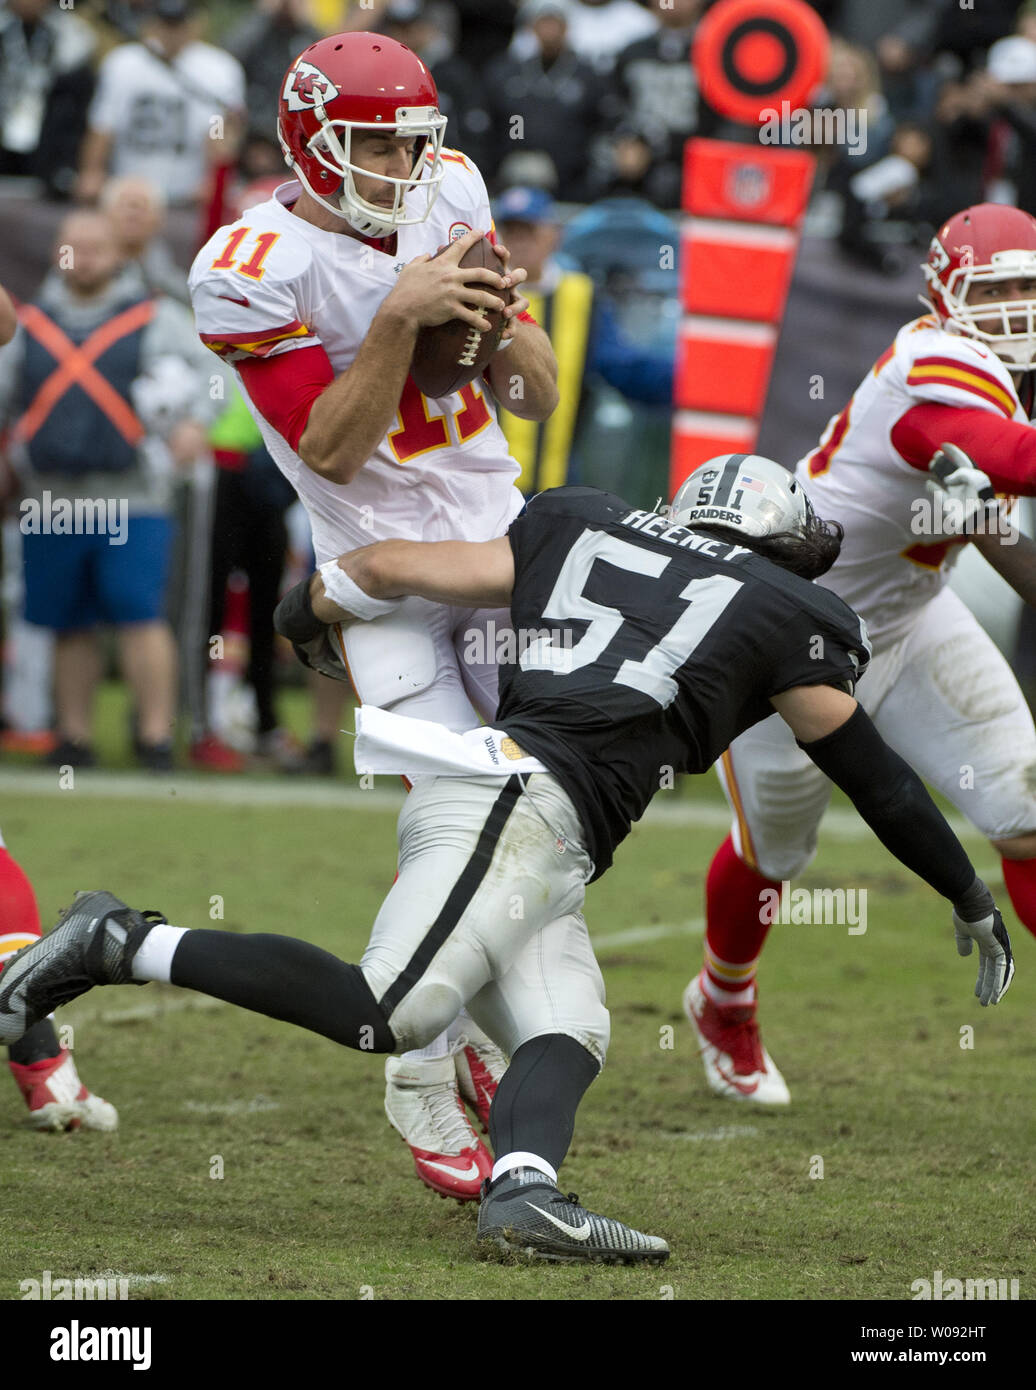 Kansas City Chiefs QB Alex Smith (11) is hit by Oakland Raiders Ben Heeney (51) in the second quarter at O.co Coliseum in Oakland, California on December 6, 2015. The Chiefs defeated the Raiders 34-20.    Photo by Terry Schmitt/UPI Stock Photo